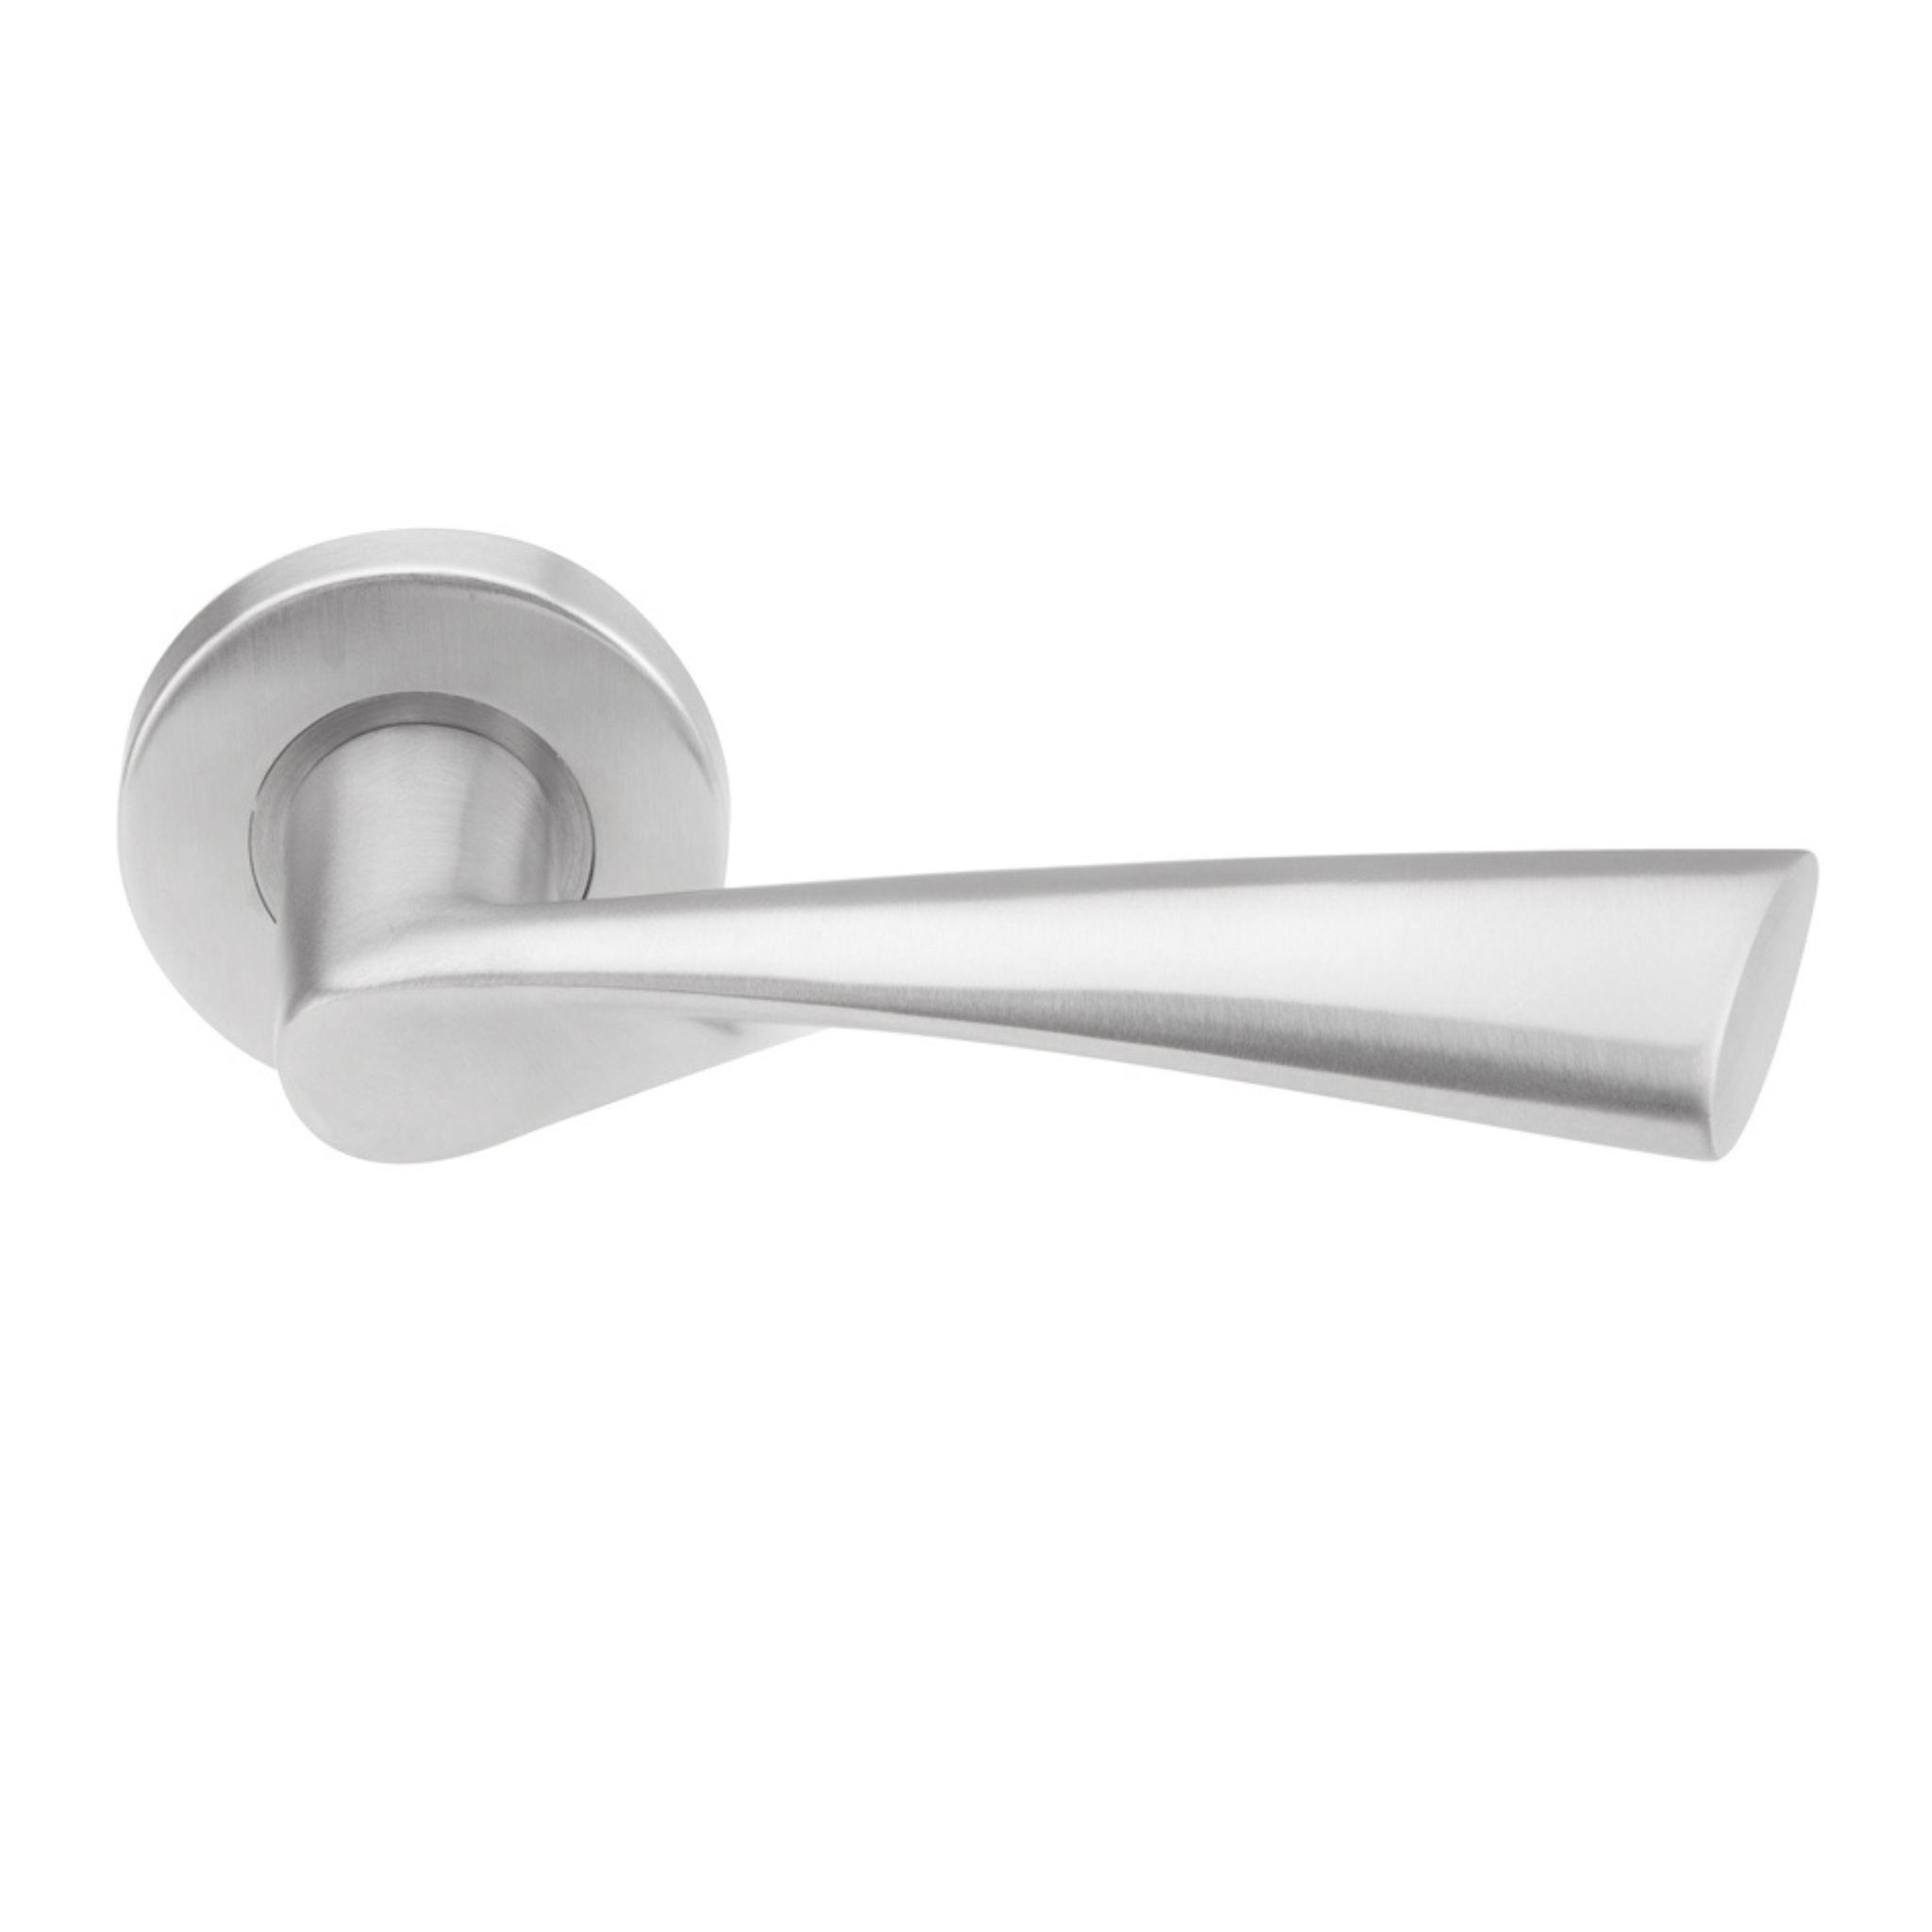 SH 815, Lever Handles, Solid, On Round Rose, With Escutcheons, 139mm (l), Stainless Steel, DORMAKABA